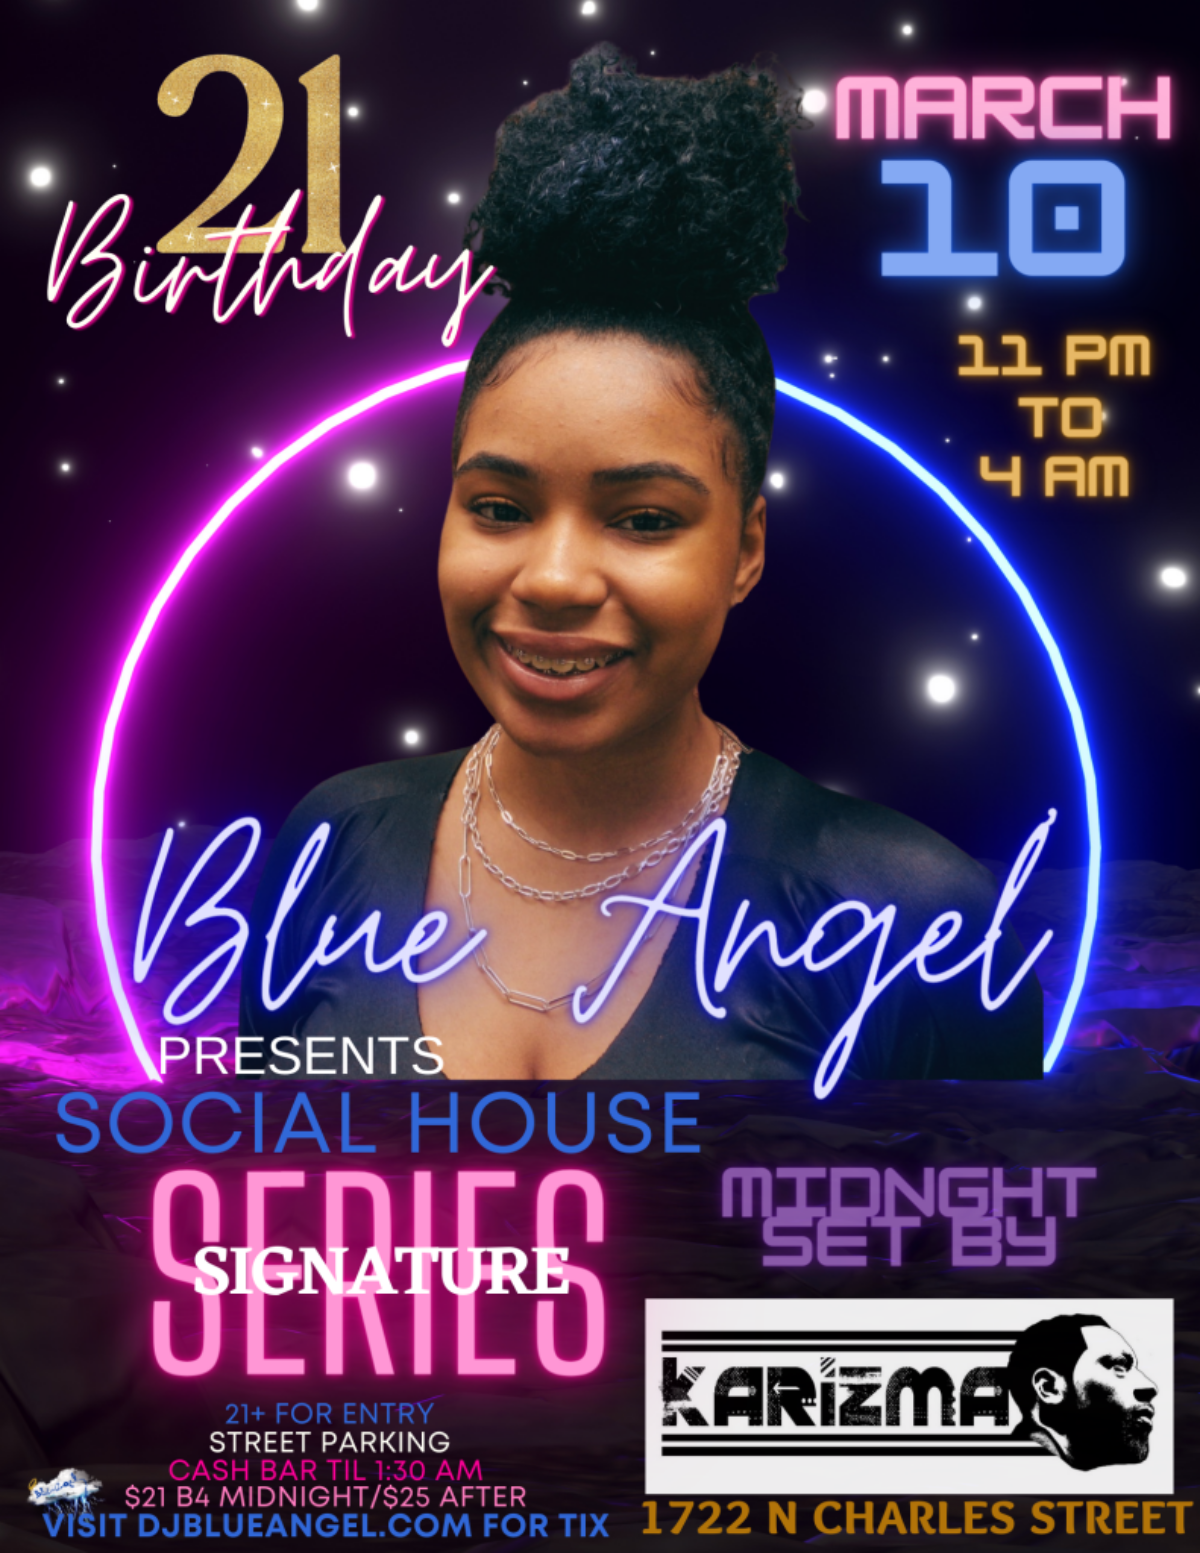 Blue Angel Presents Signature House Series With Special Guest Karizma